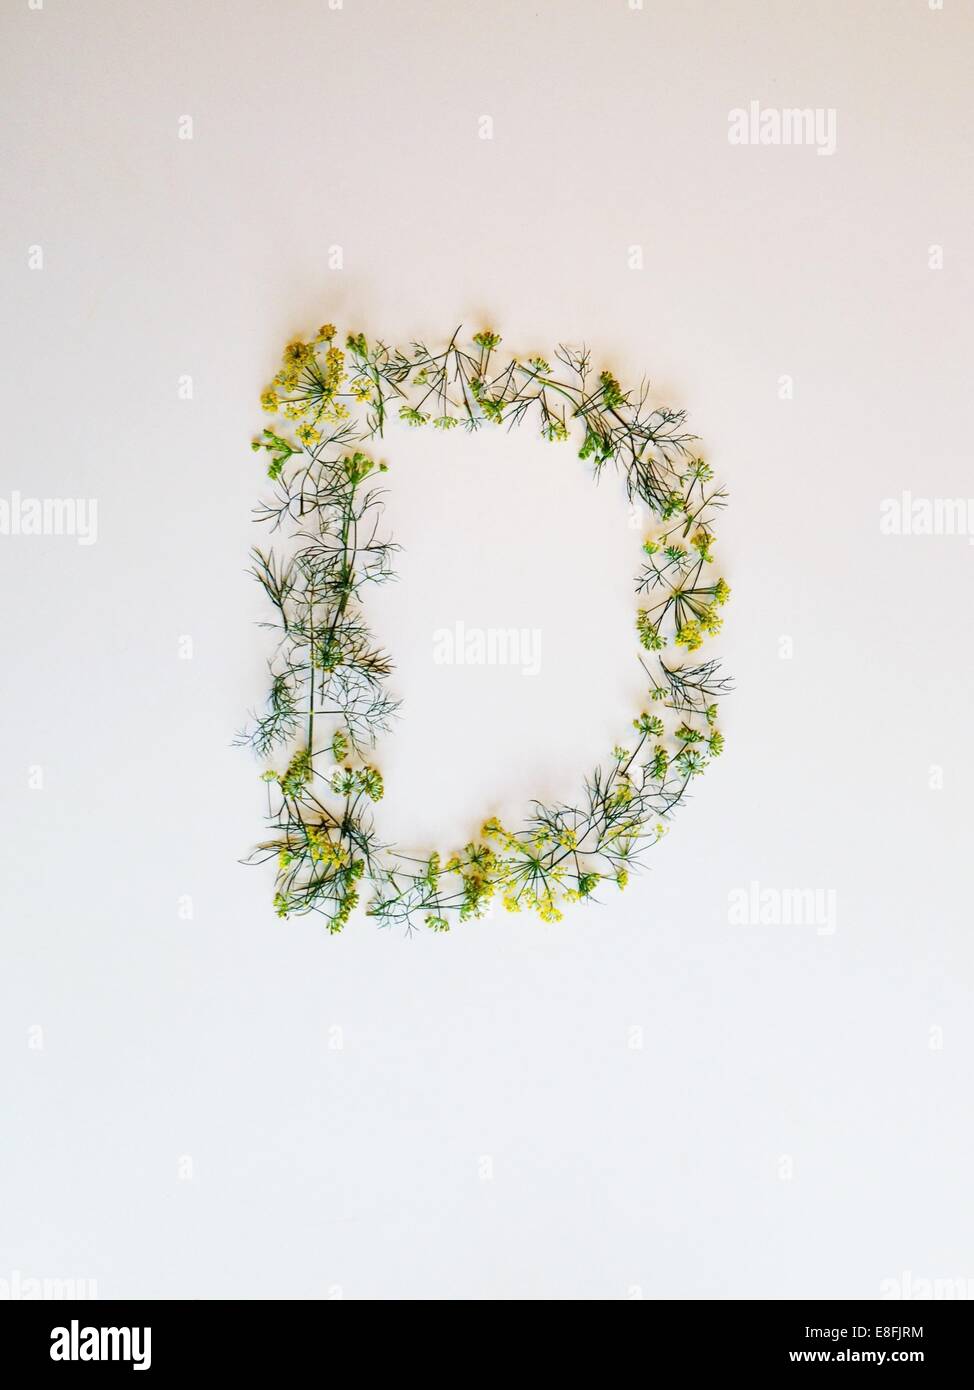 Letter D made of dill and dill flowers Stock Photo